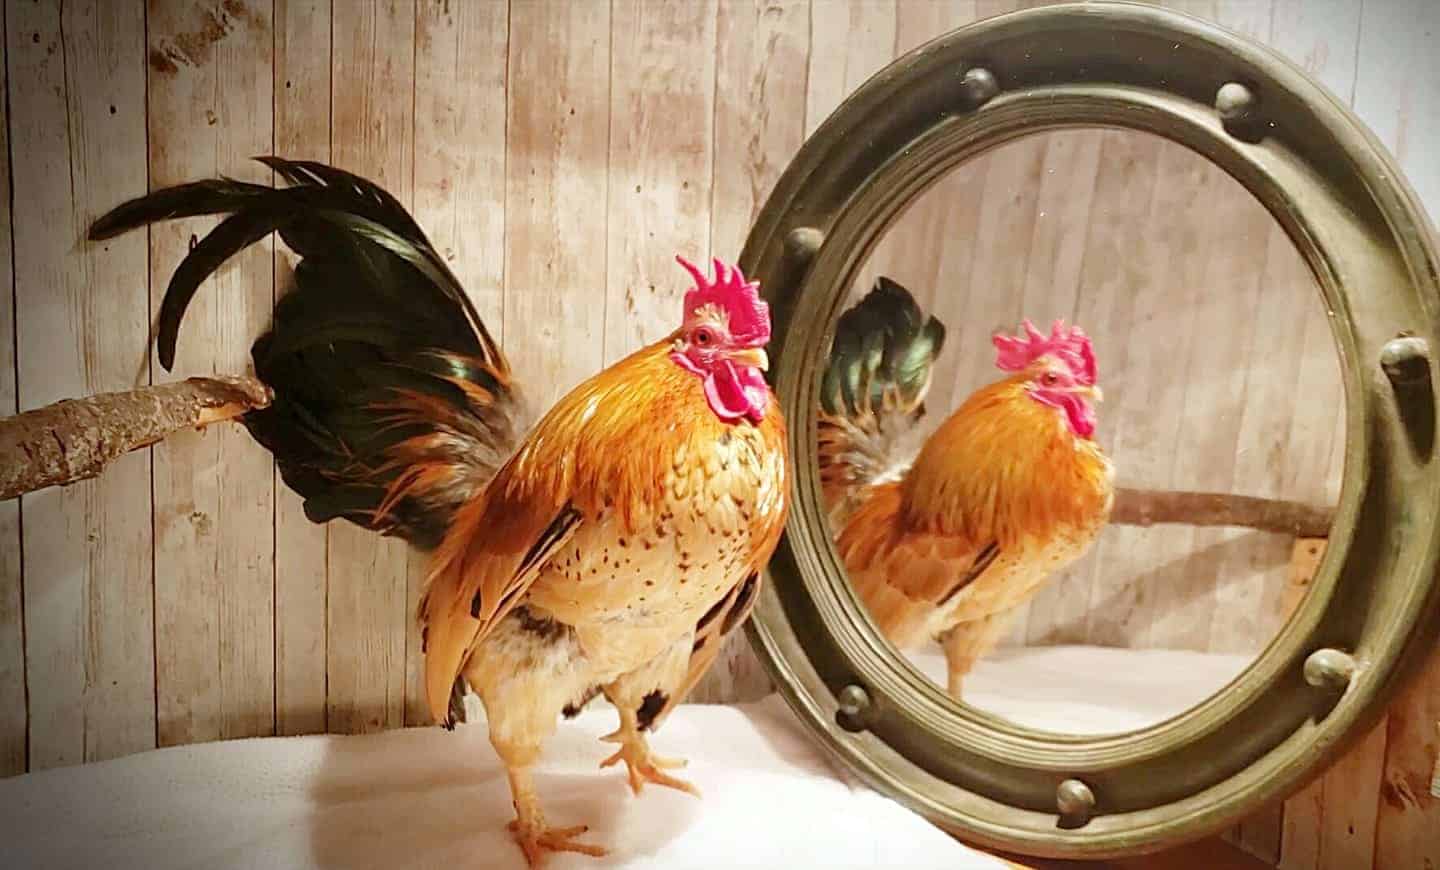 A rooster looking at themself in a mirror.